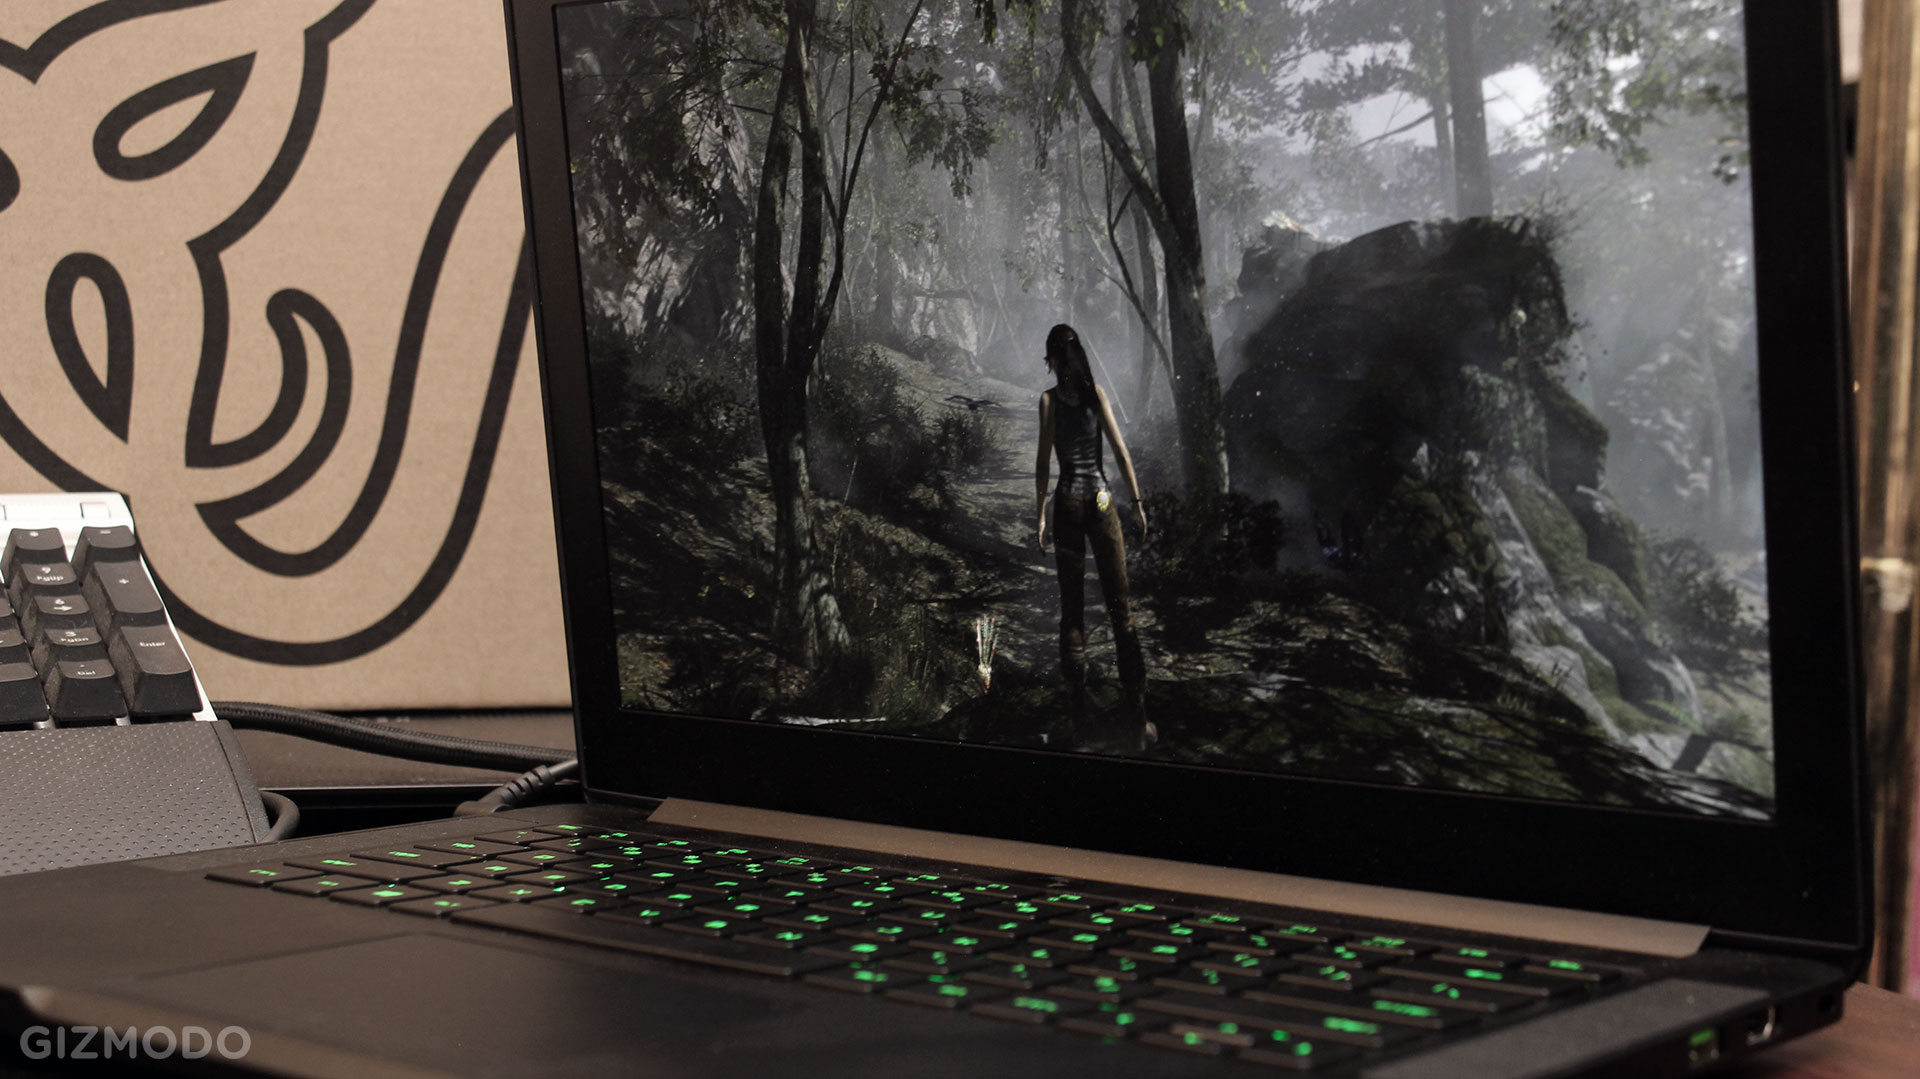 Razer Blade 2015 Review: Finally Living The Thin Gaming Laptop Dream